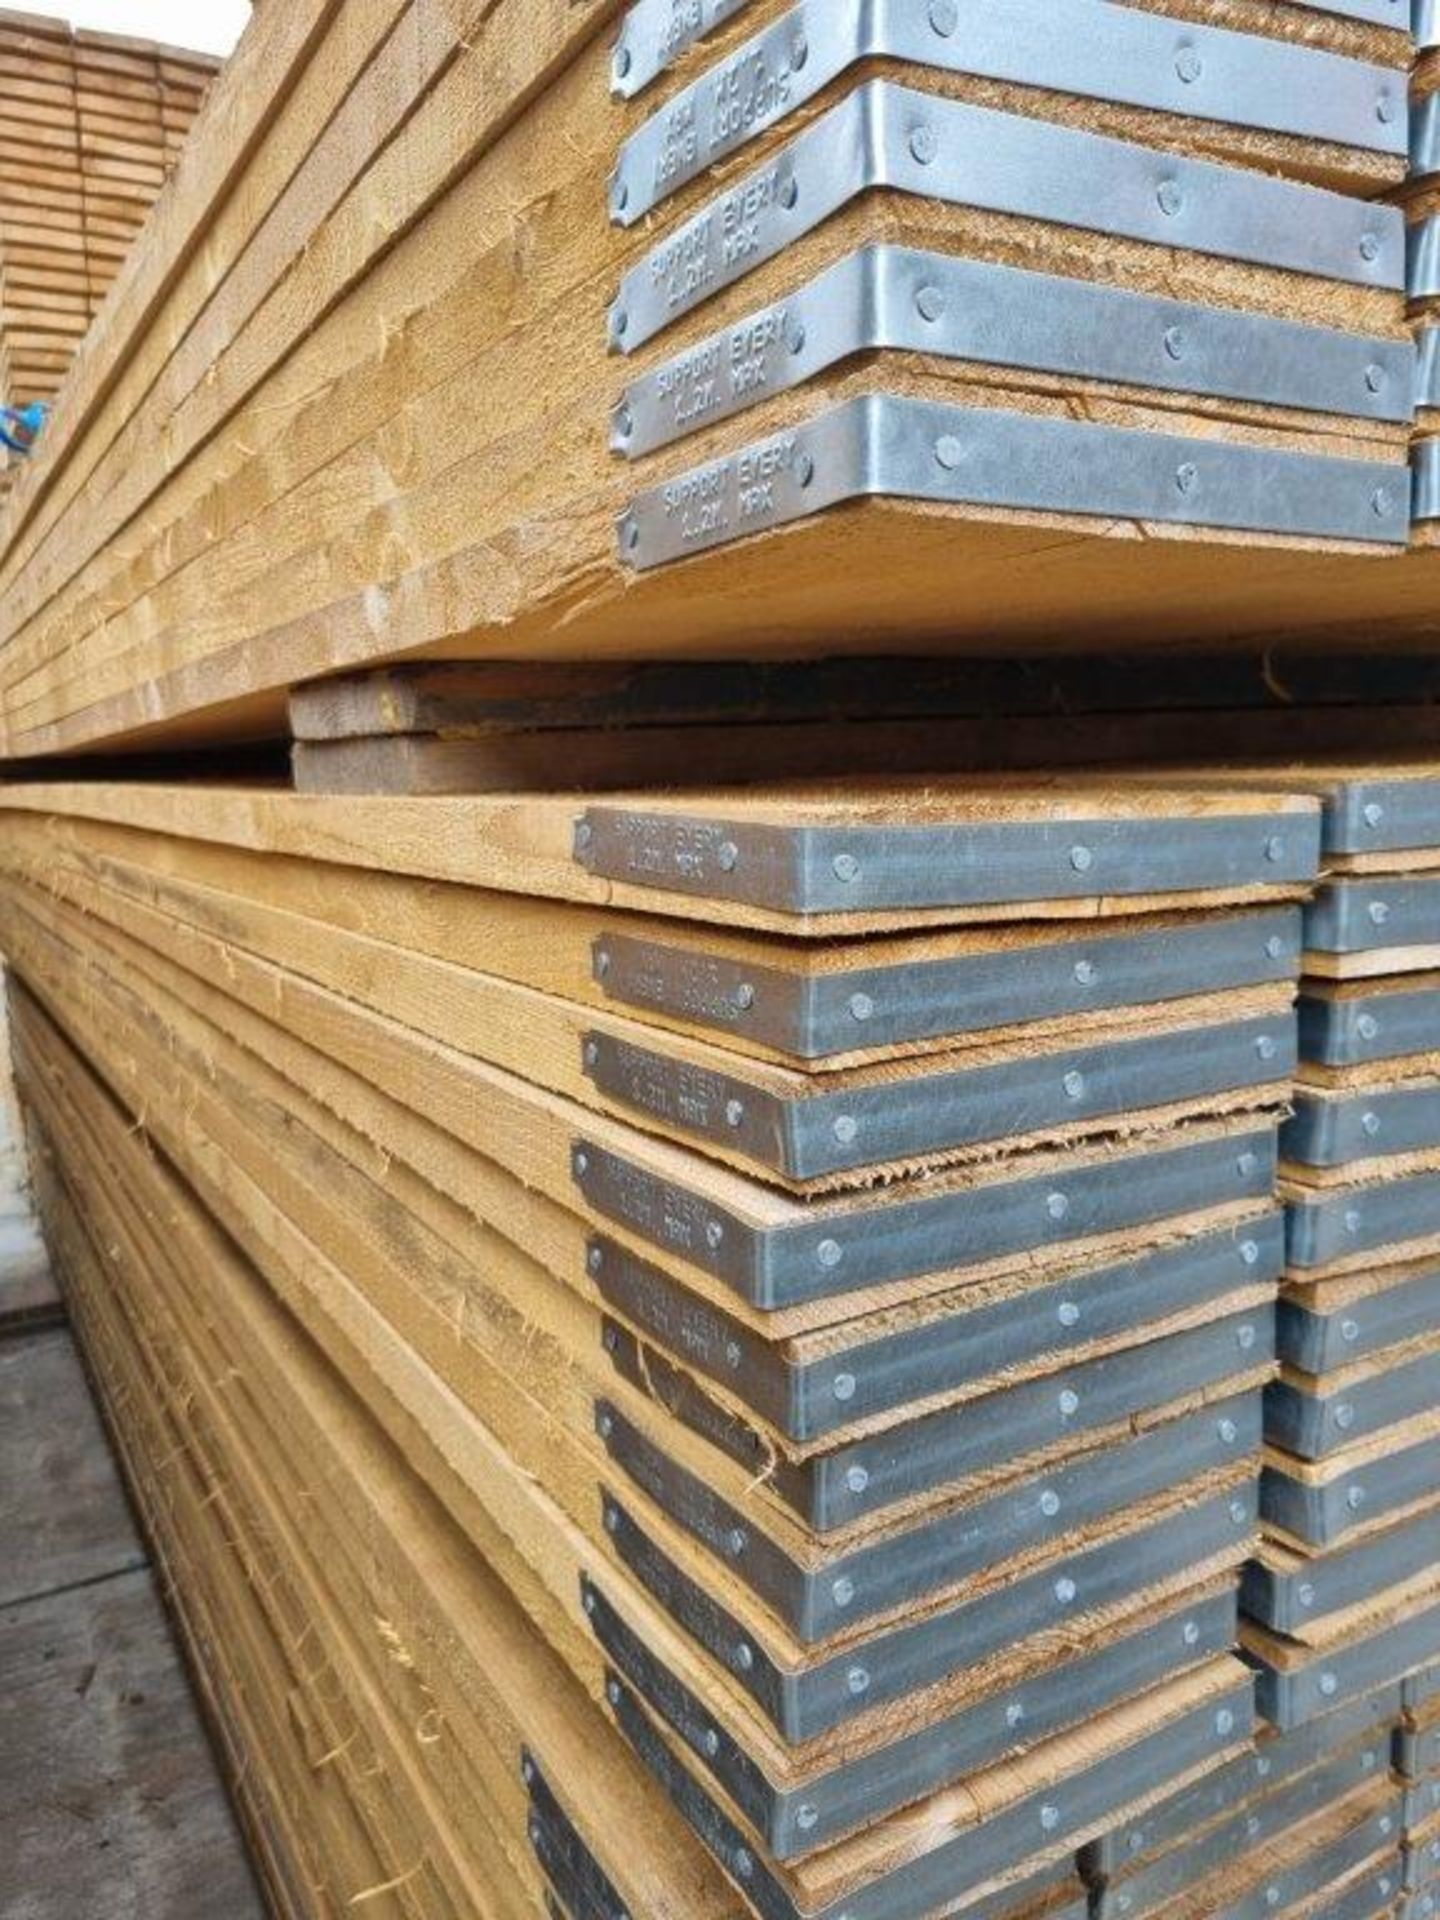 25 x New 13ft Banded Scaffold Boards - Image 2 of 2